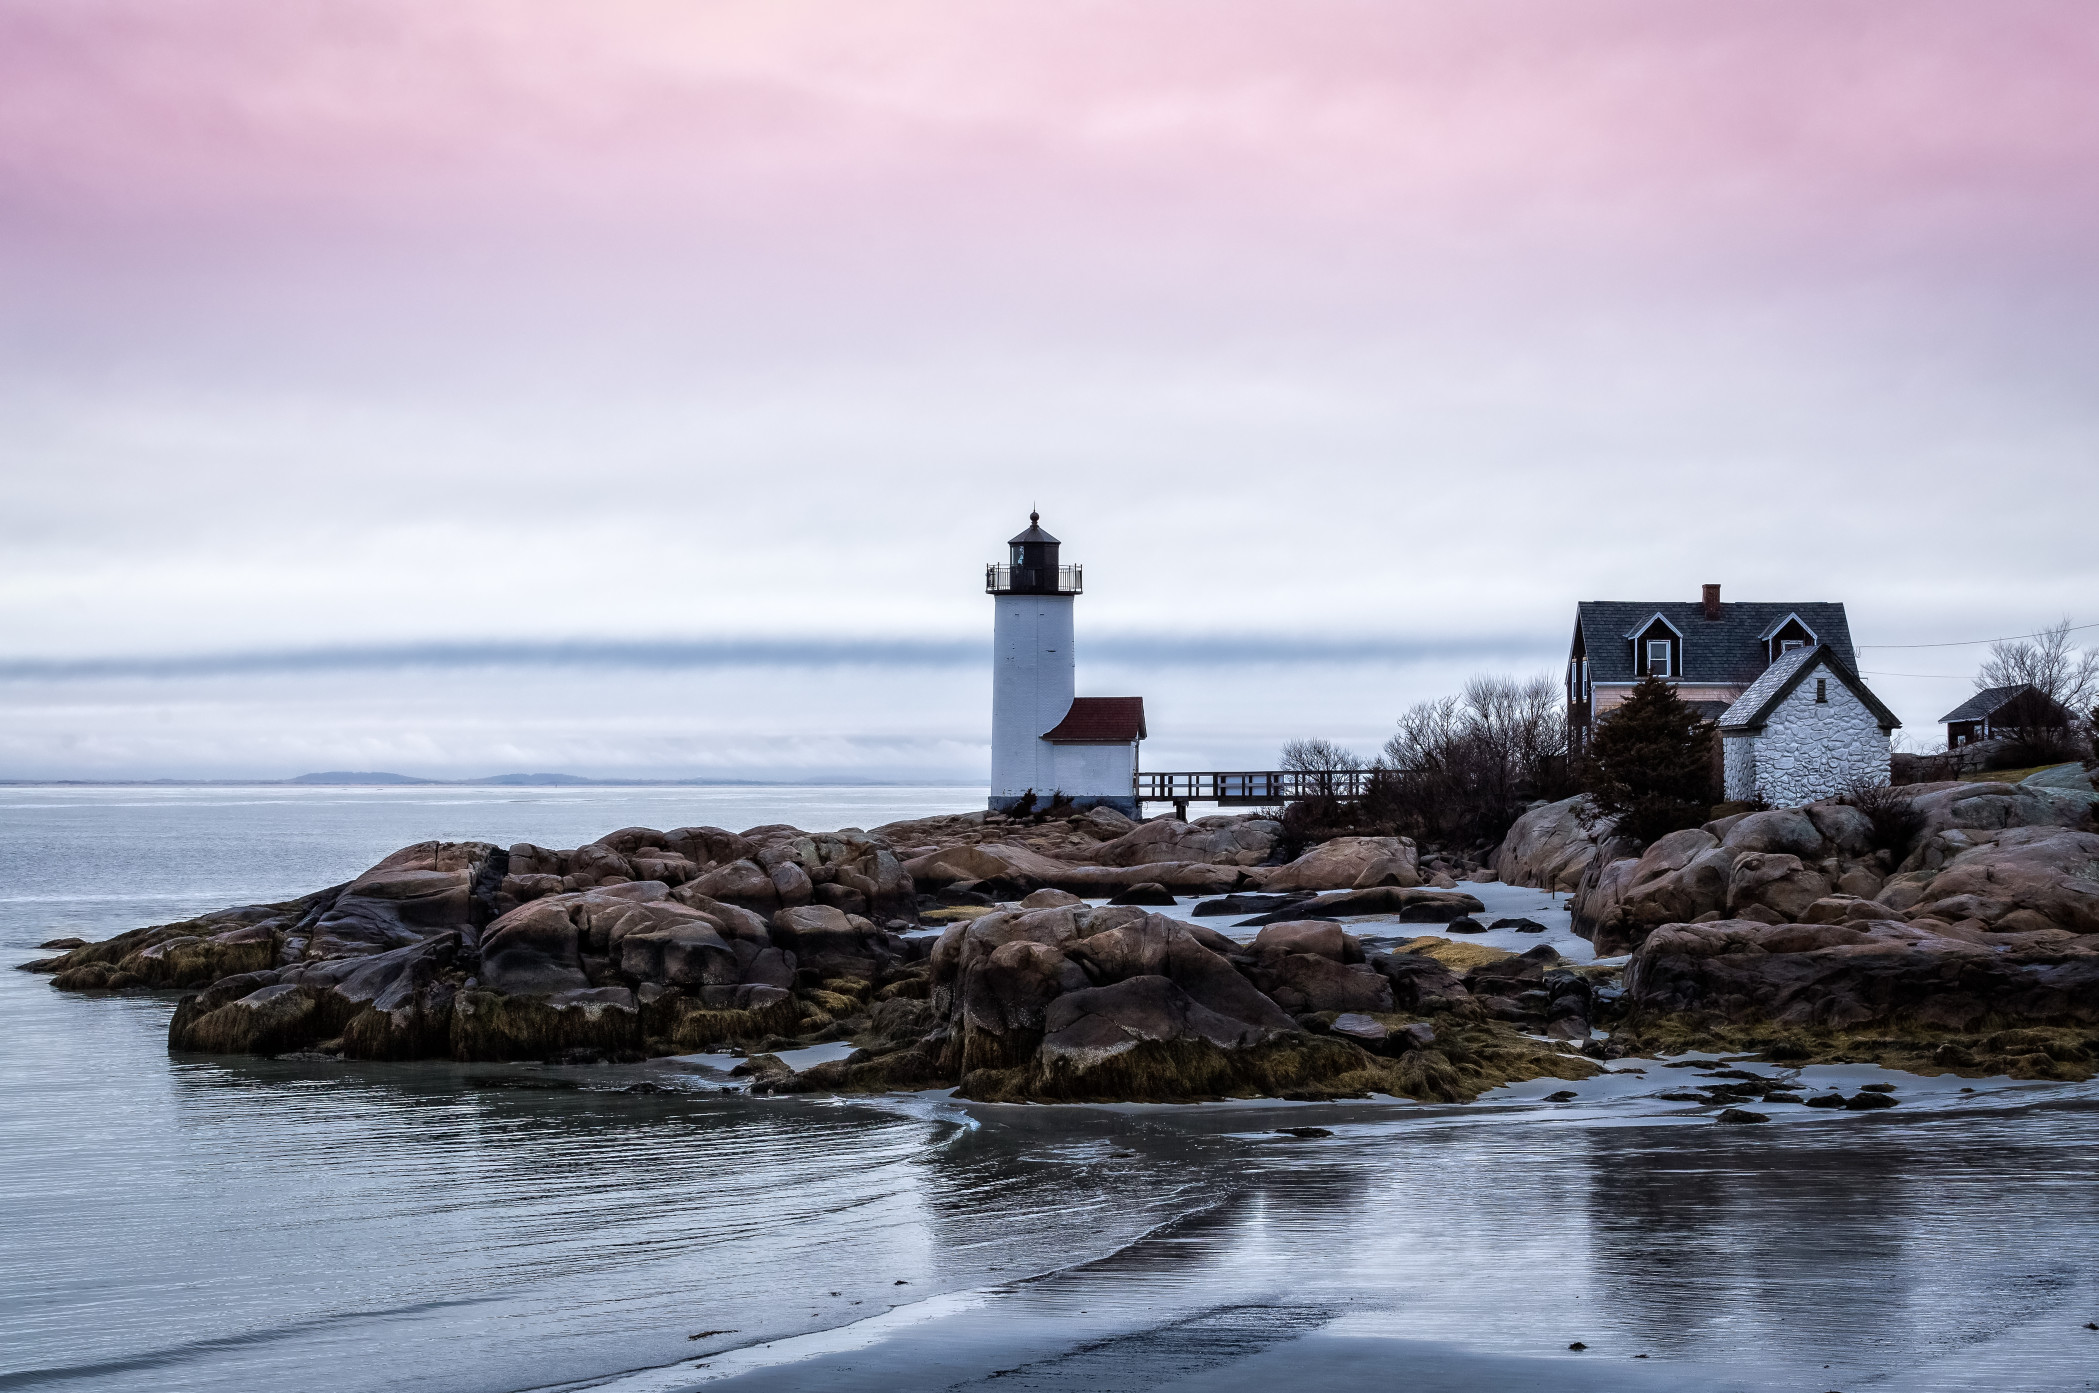 A lighthouse standing tall on a peninsula in New England